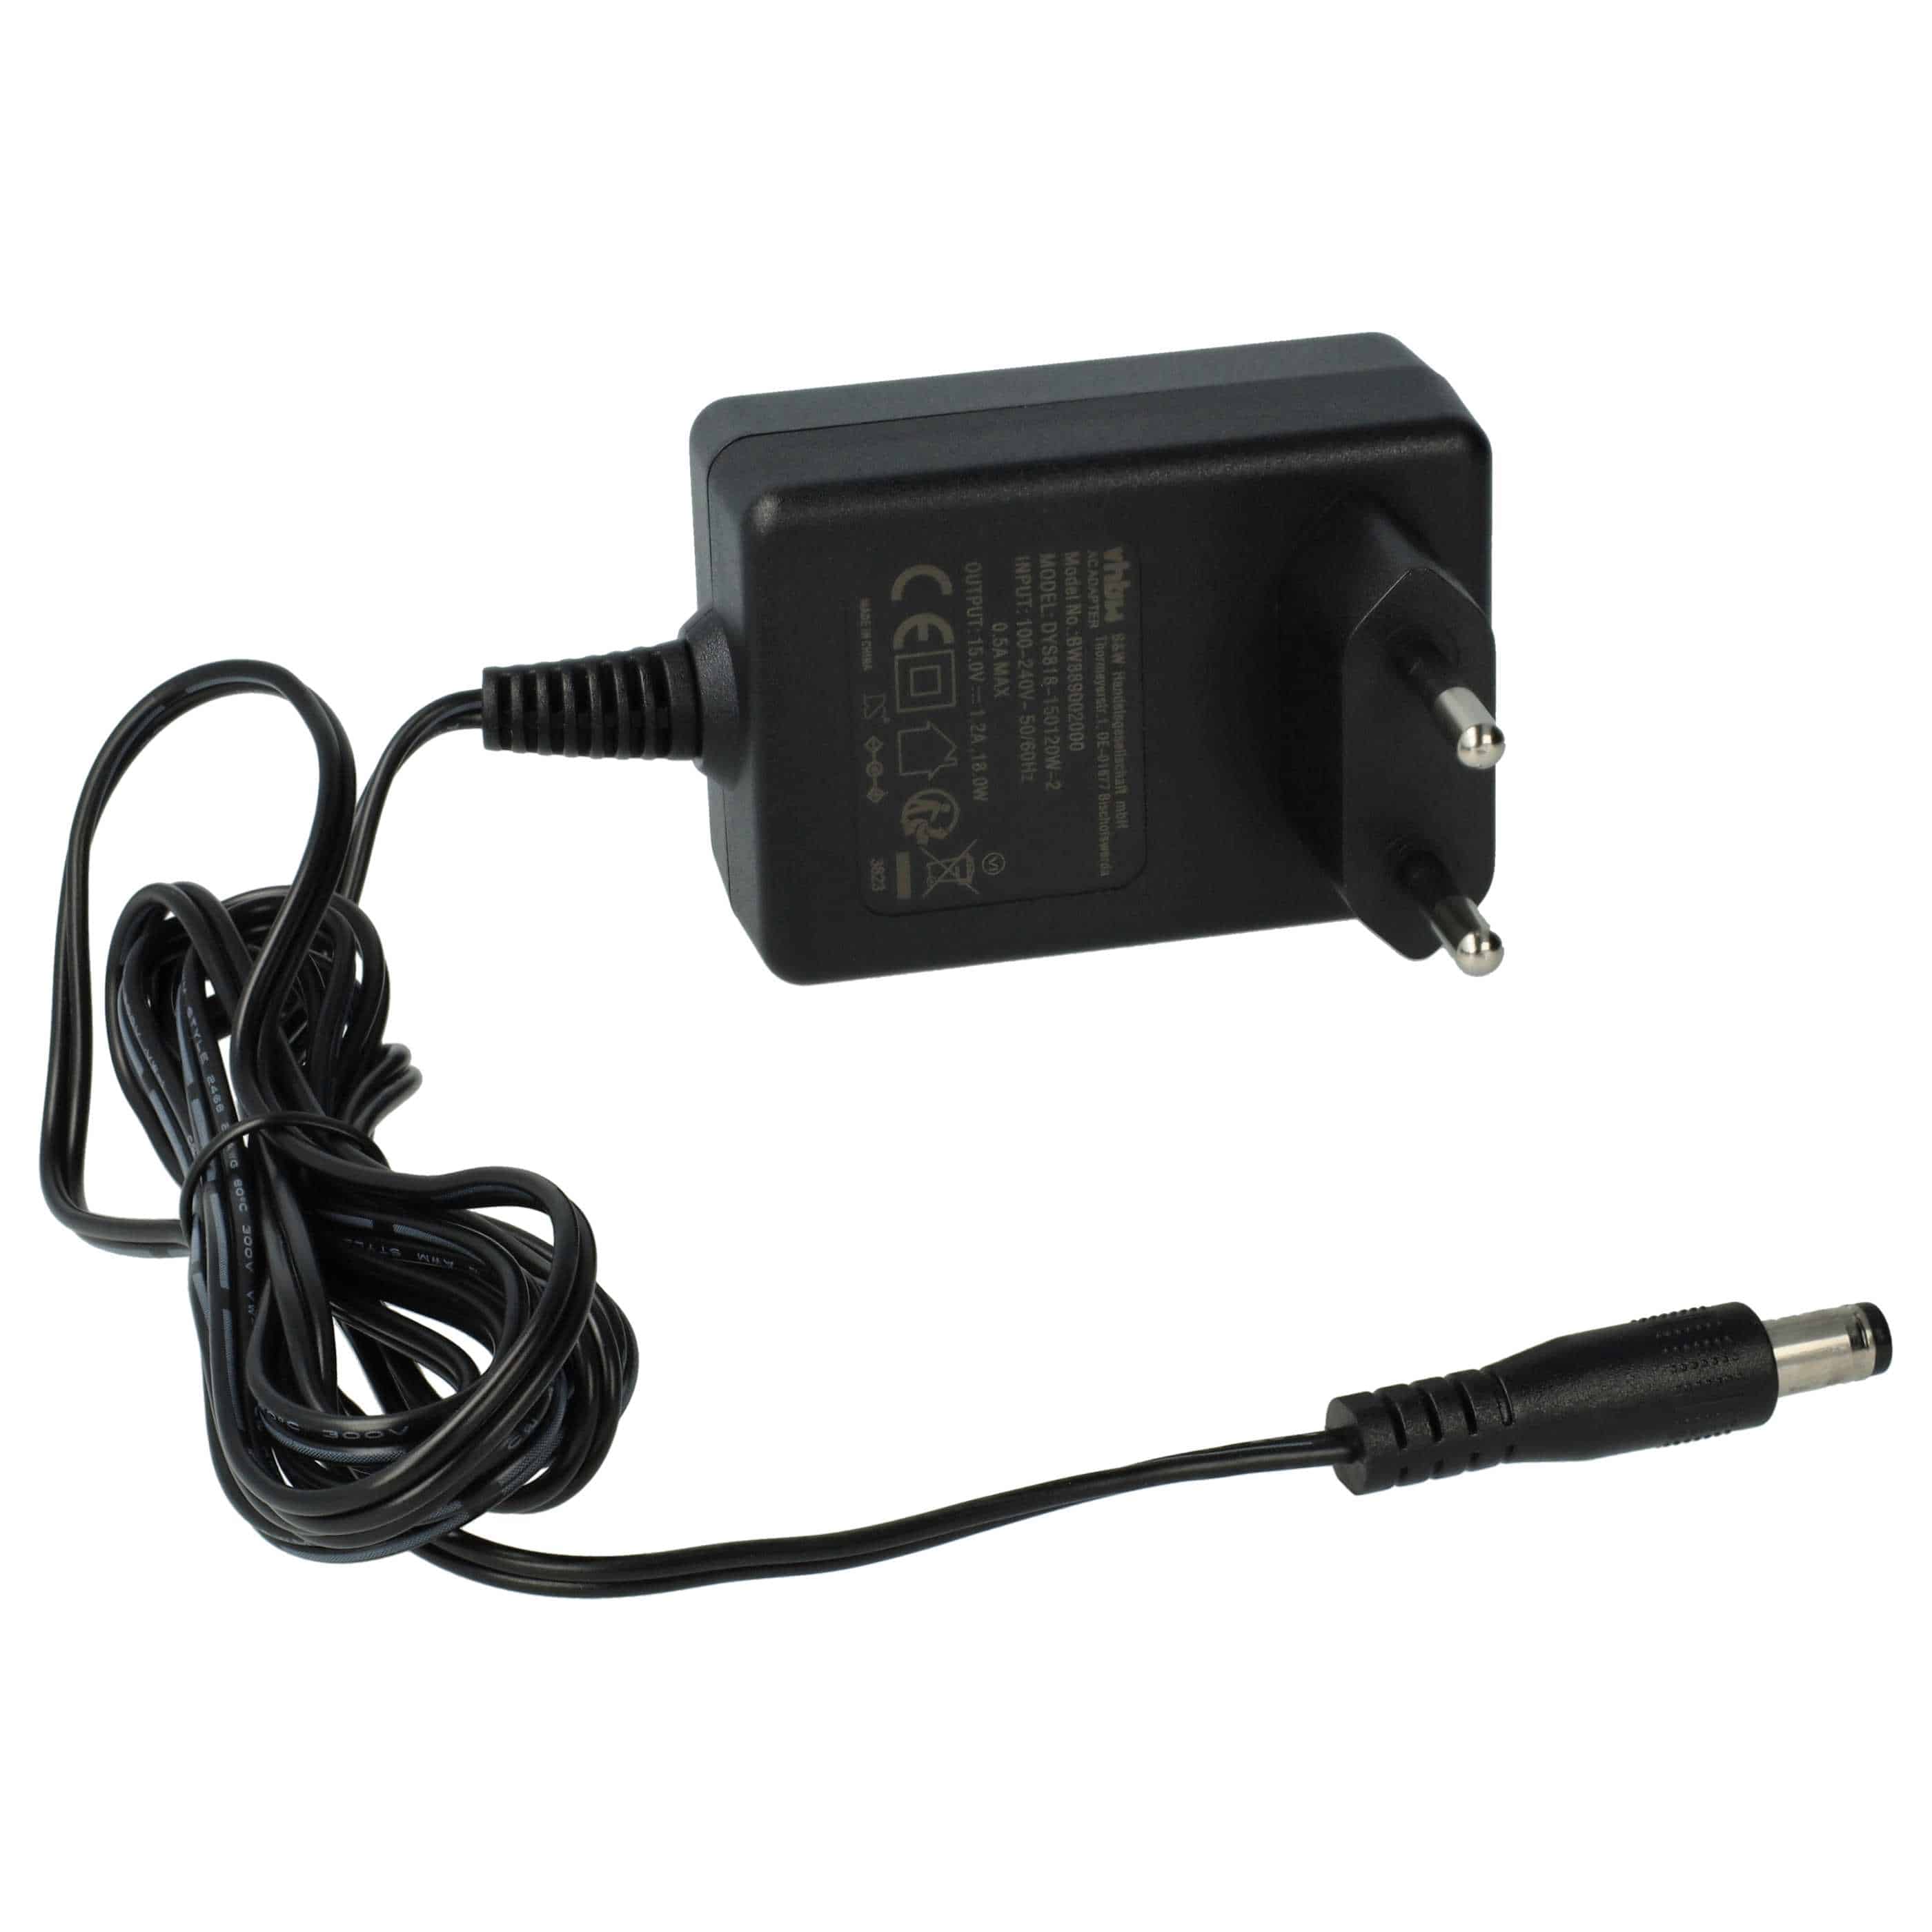 Mains Power Adapter replaces AcBel AD7016 for Pro-Ject Modem etc. - 175 cm